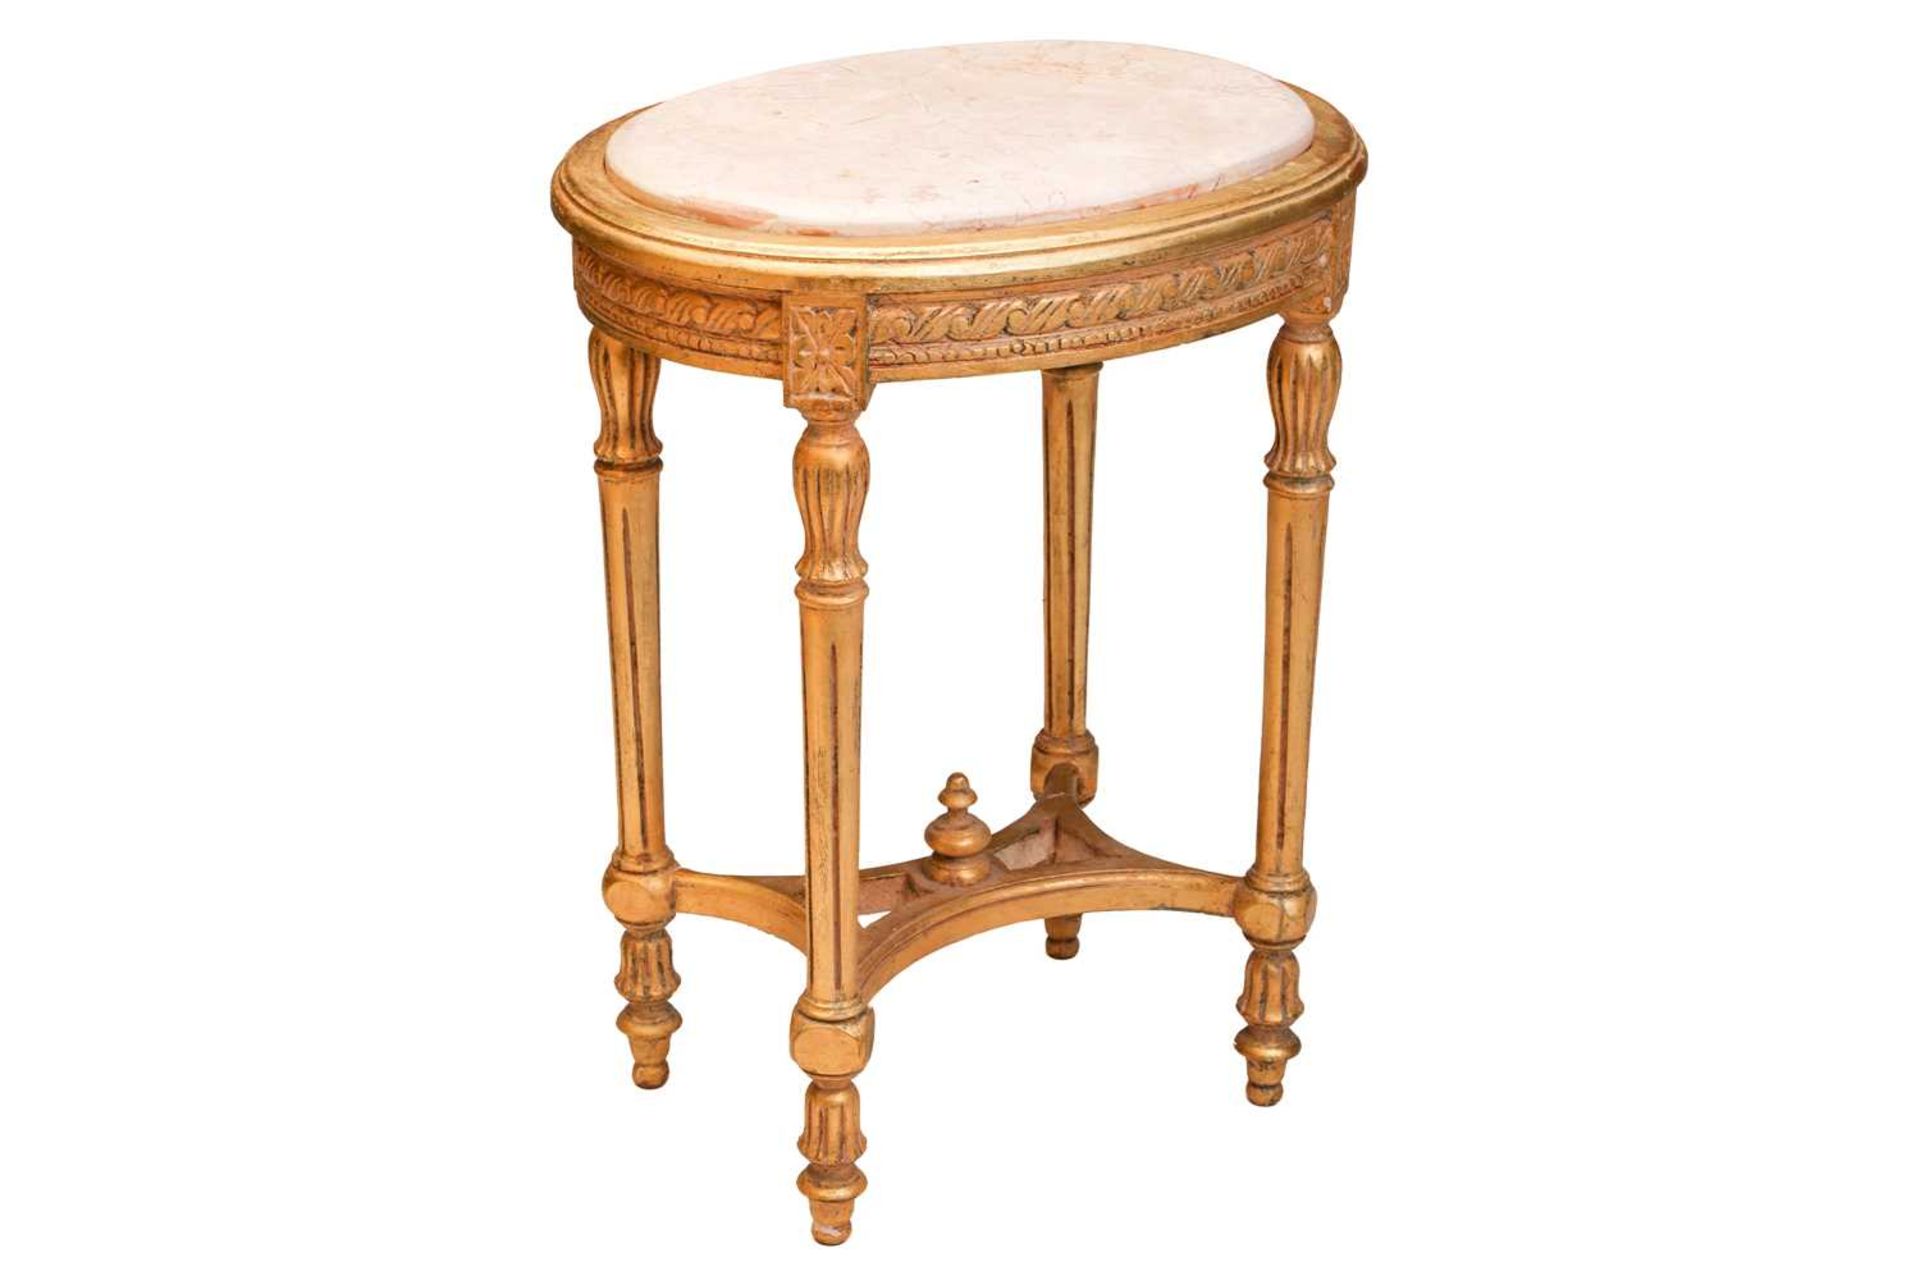 A Louis XVI style marble-topped oval giltwood table, 20th century with turned supports and shaped - Image 4 of 10